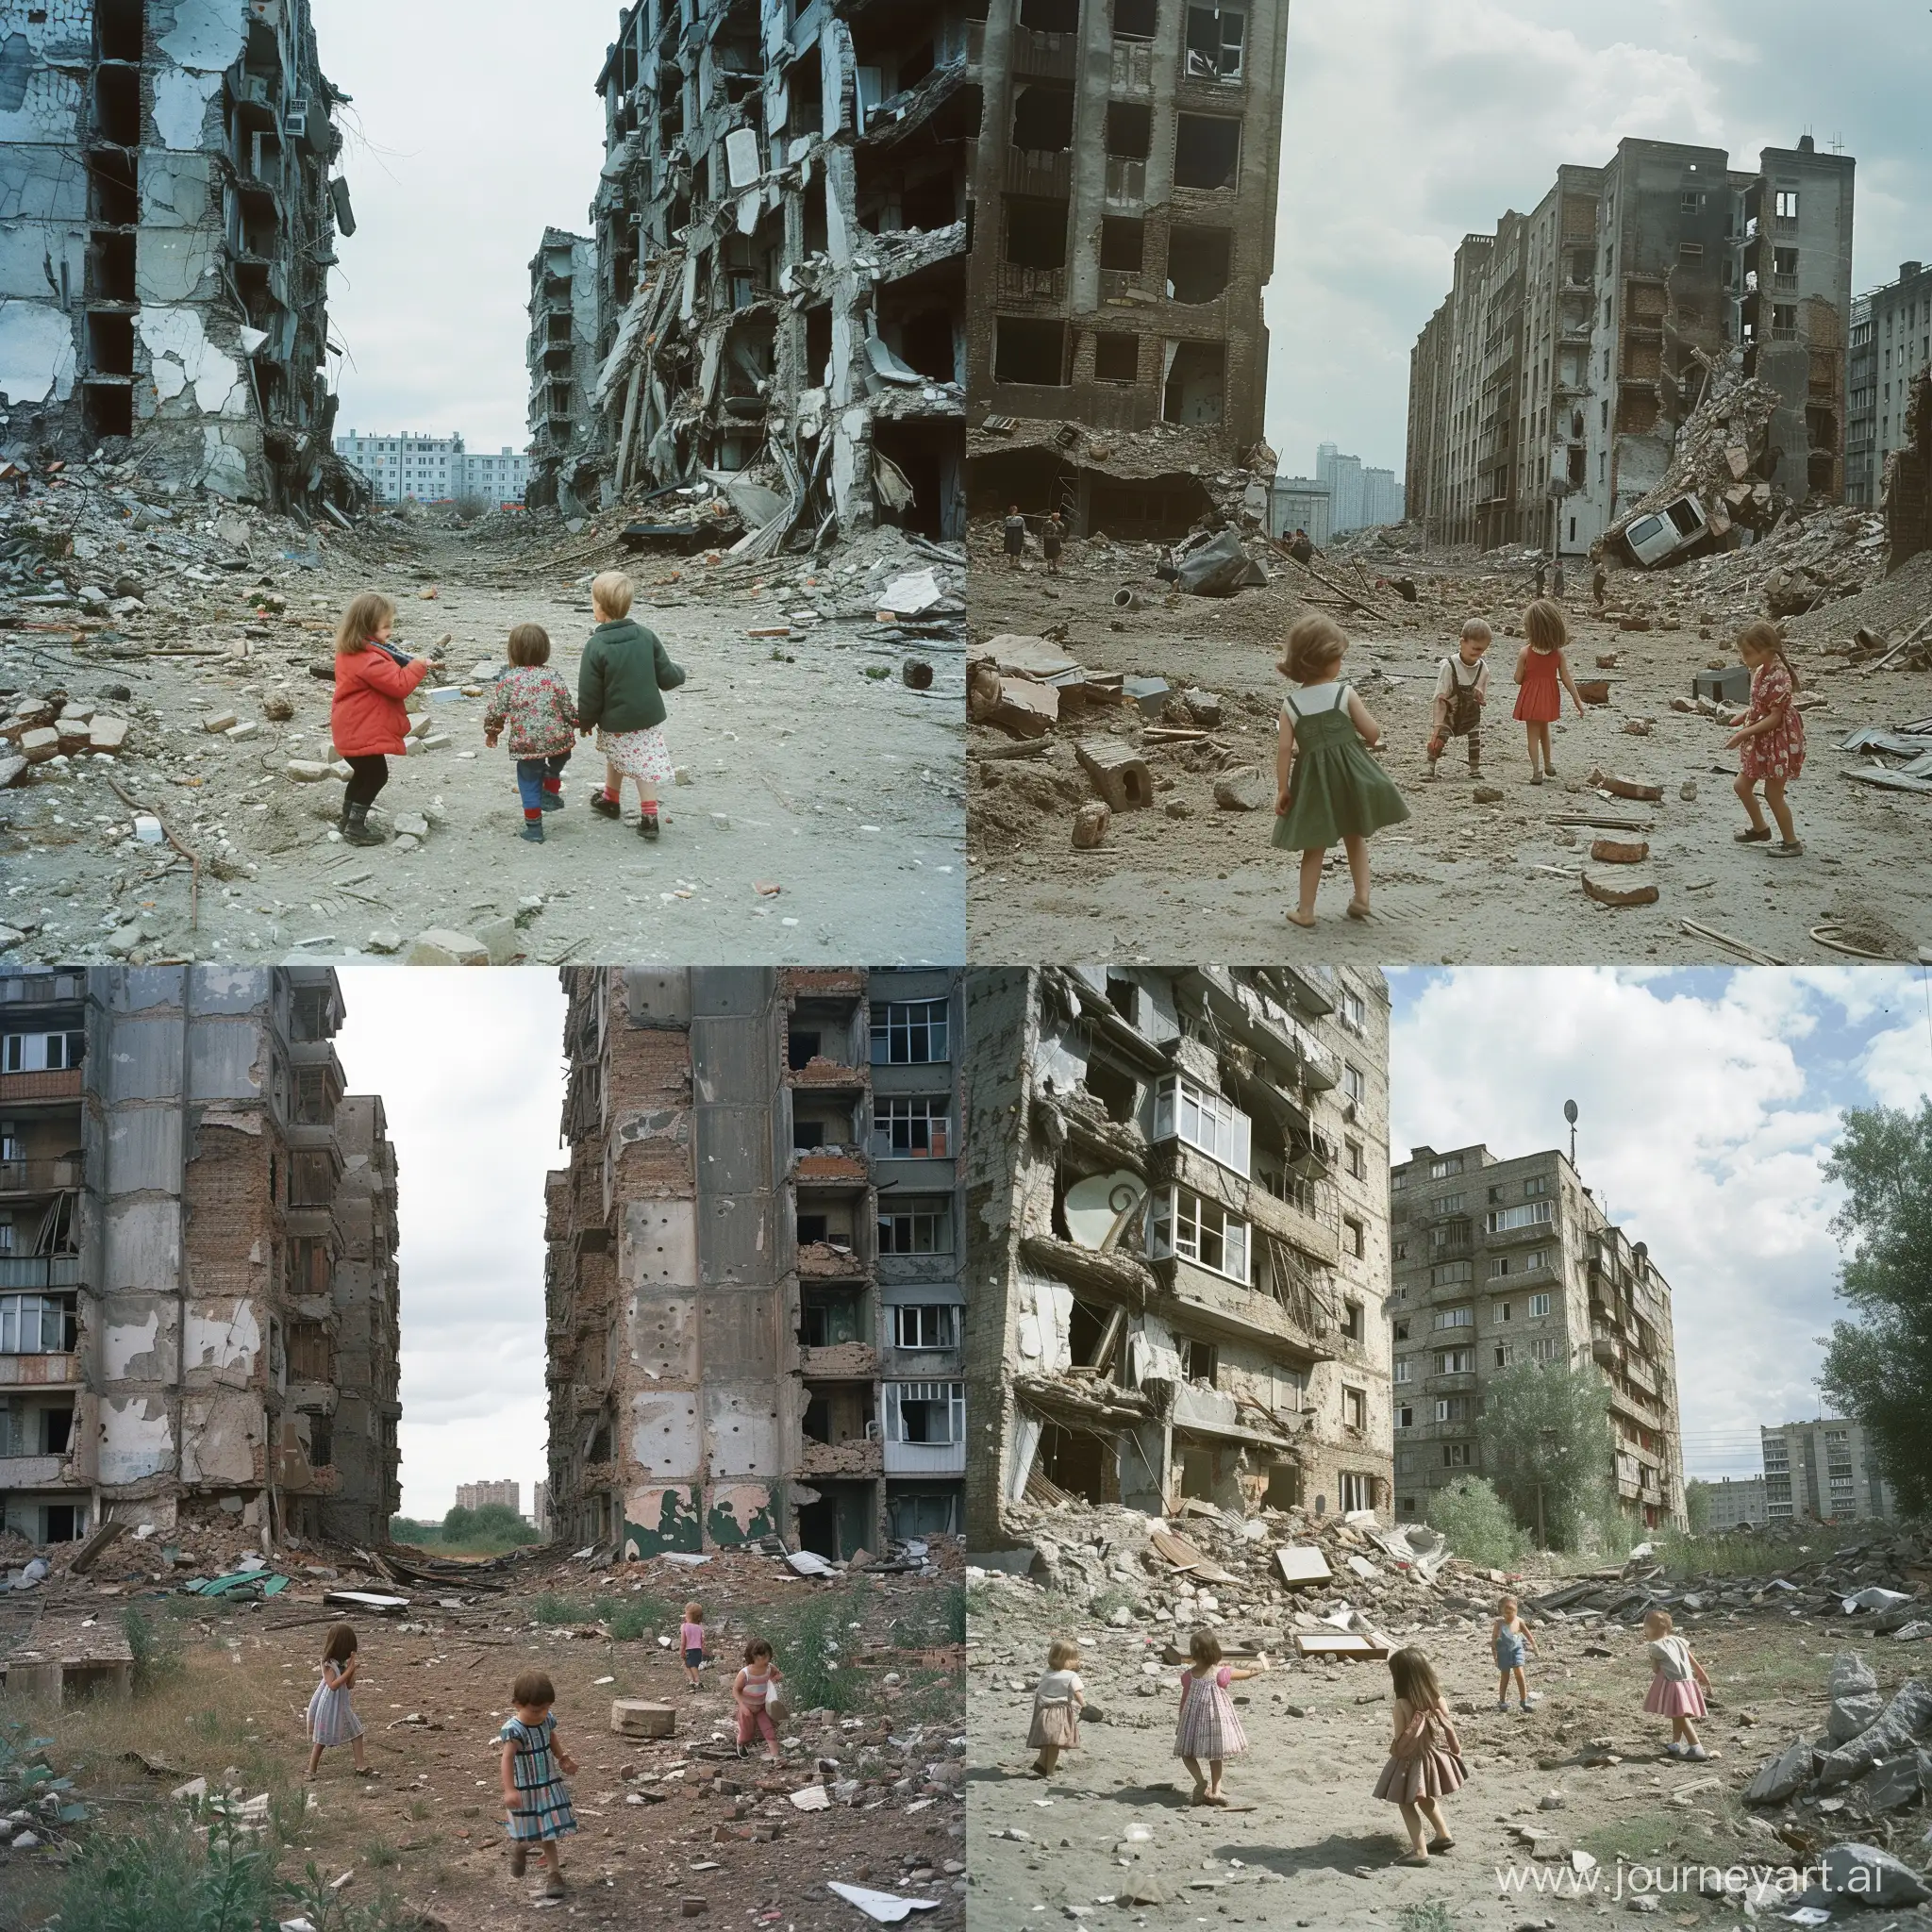 Soviet-Era-Children-Playing-in-Wrecked-Buildings-1980s-Style